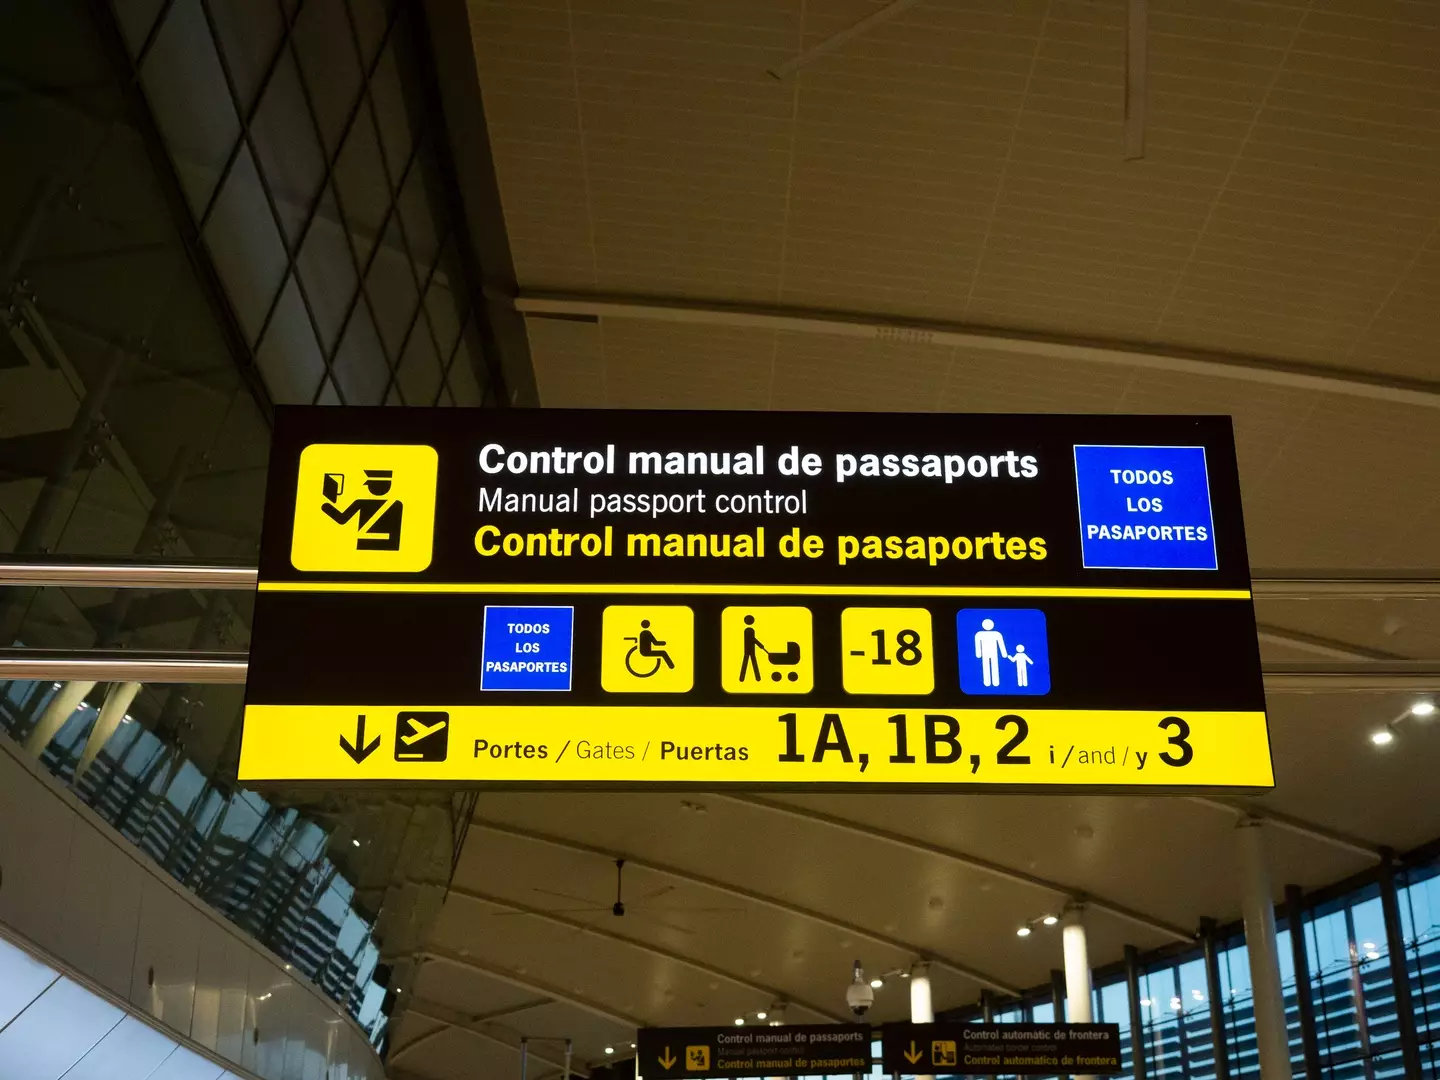 Passport control in Spain (Getty Stock Images)